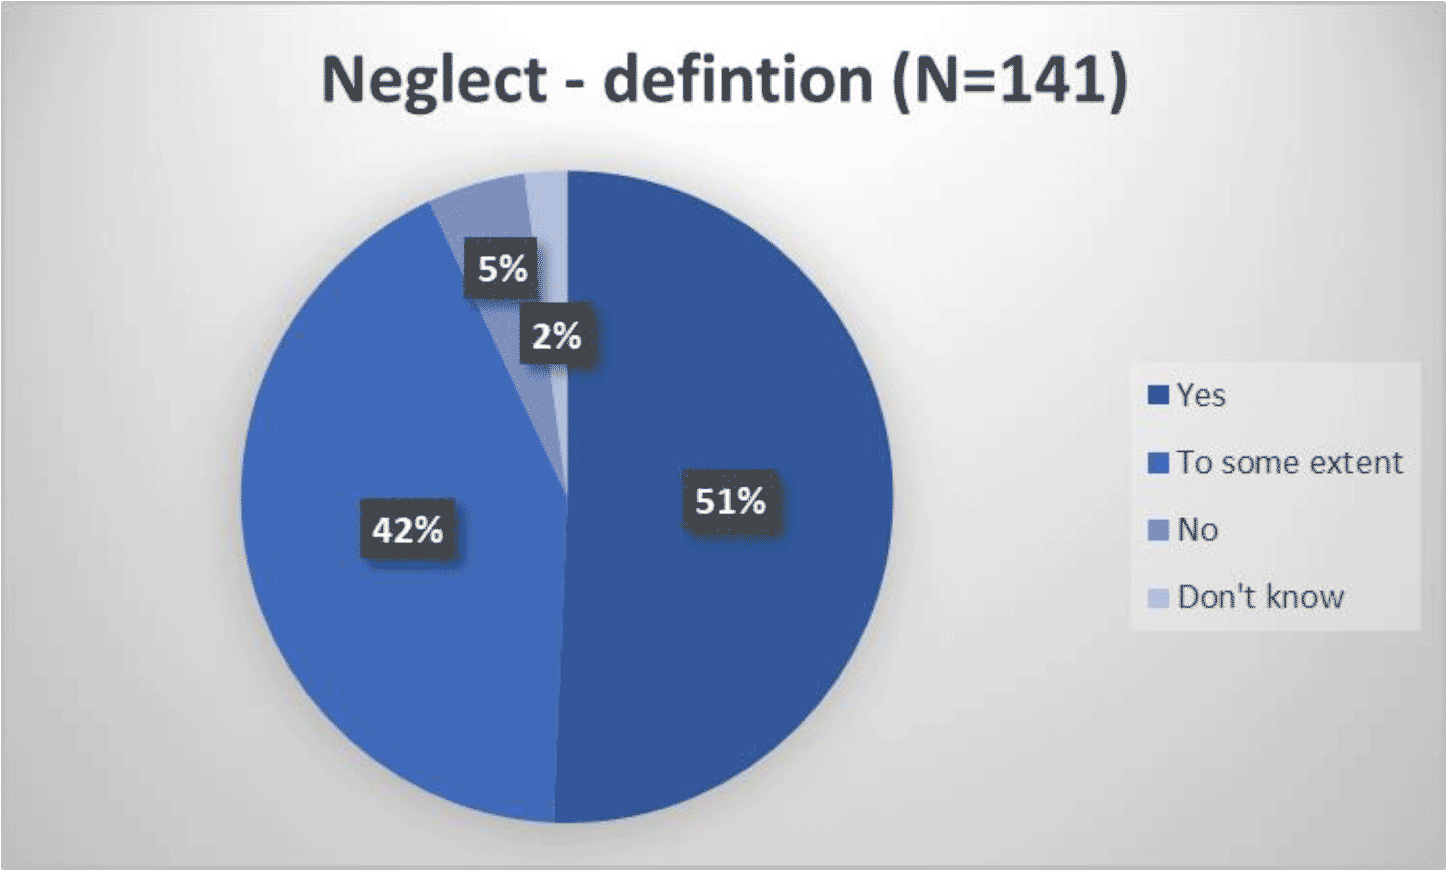 Pie chart showing whether respondents agreed with the definition of neglect:
Yes 51%
To some extent 42%
No 5%
Don't know 2%